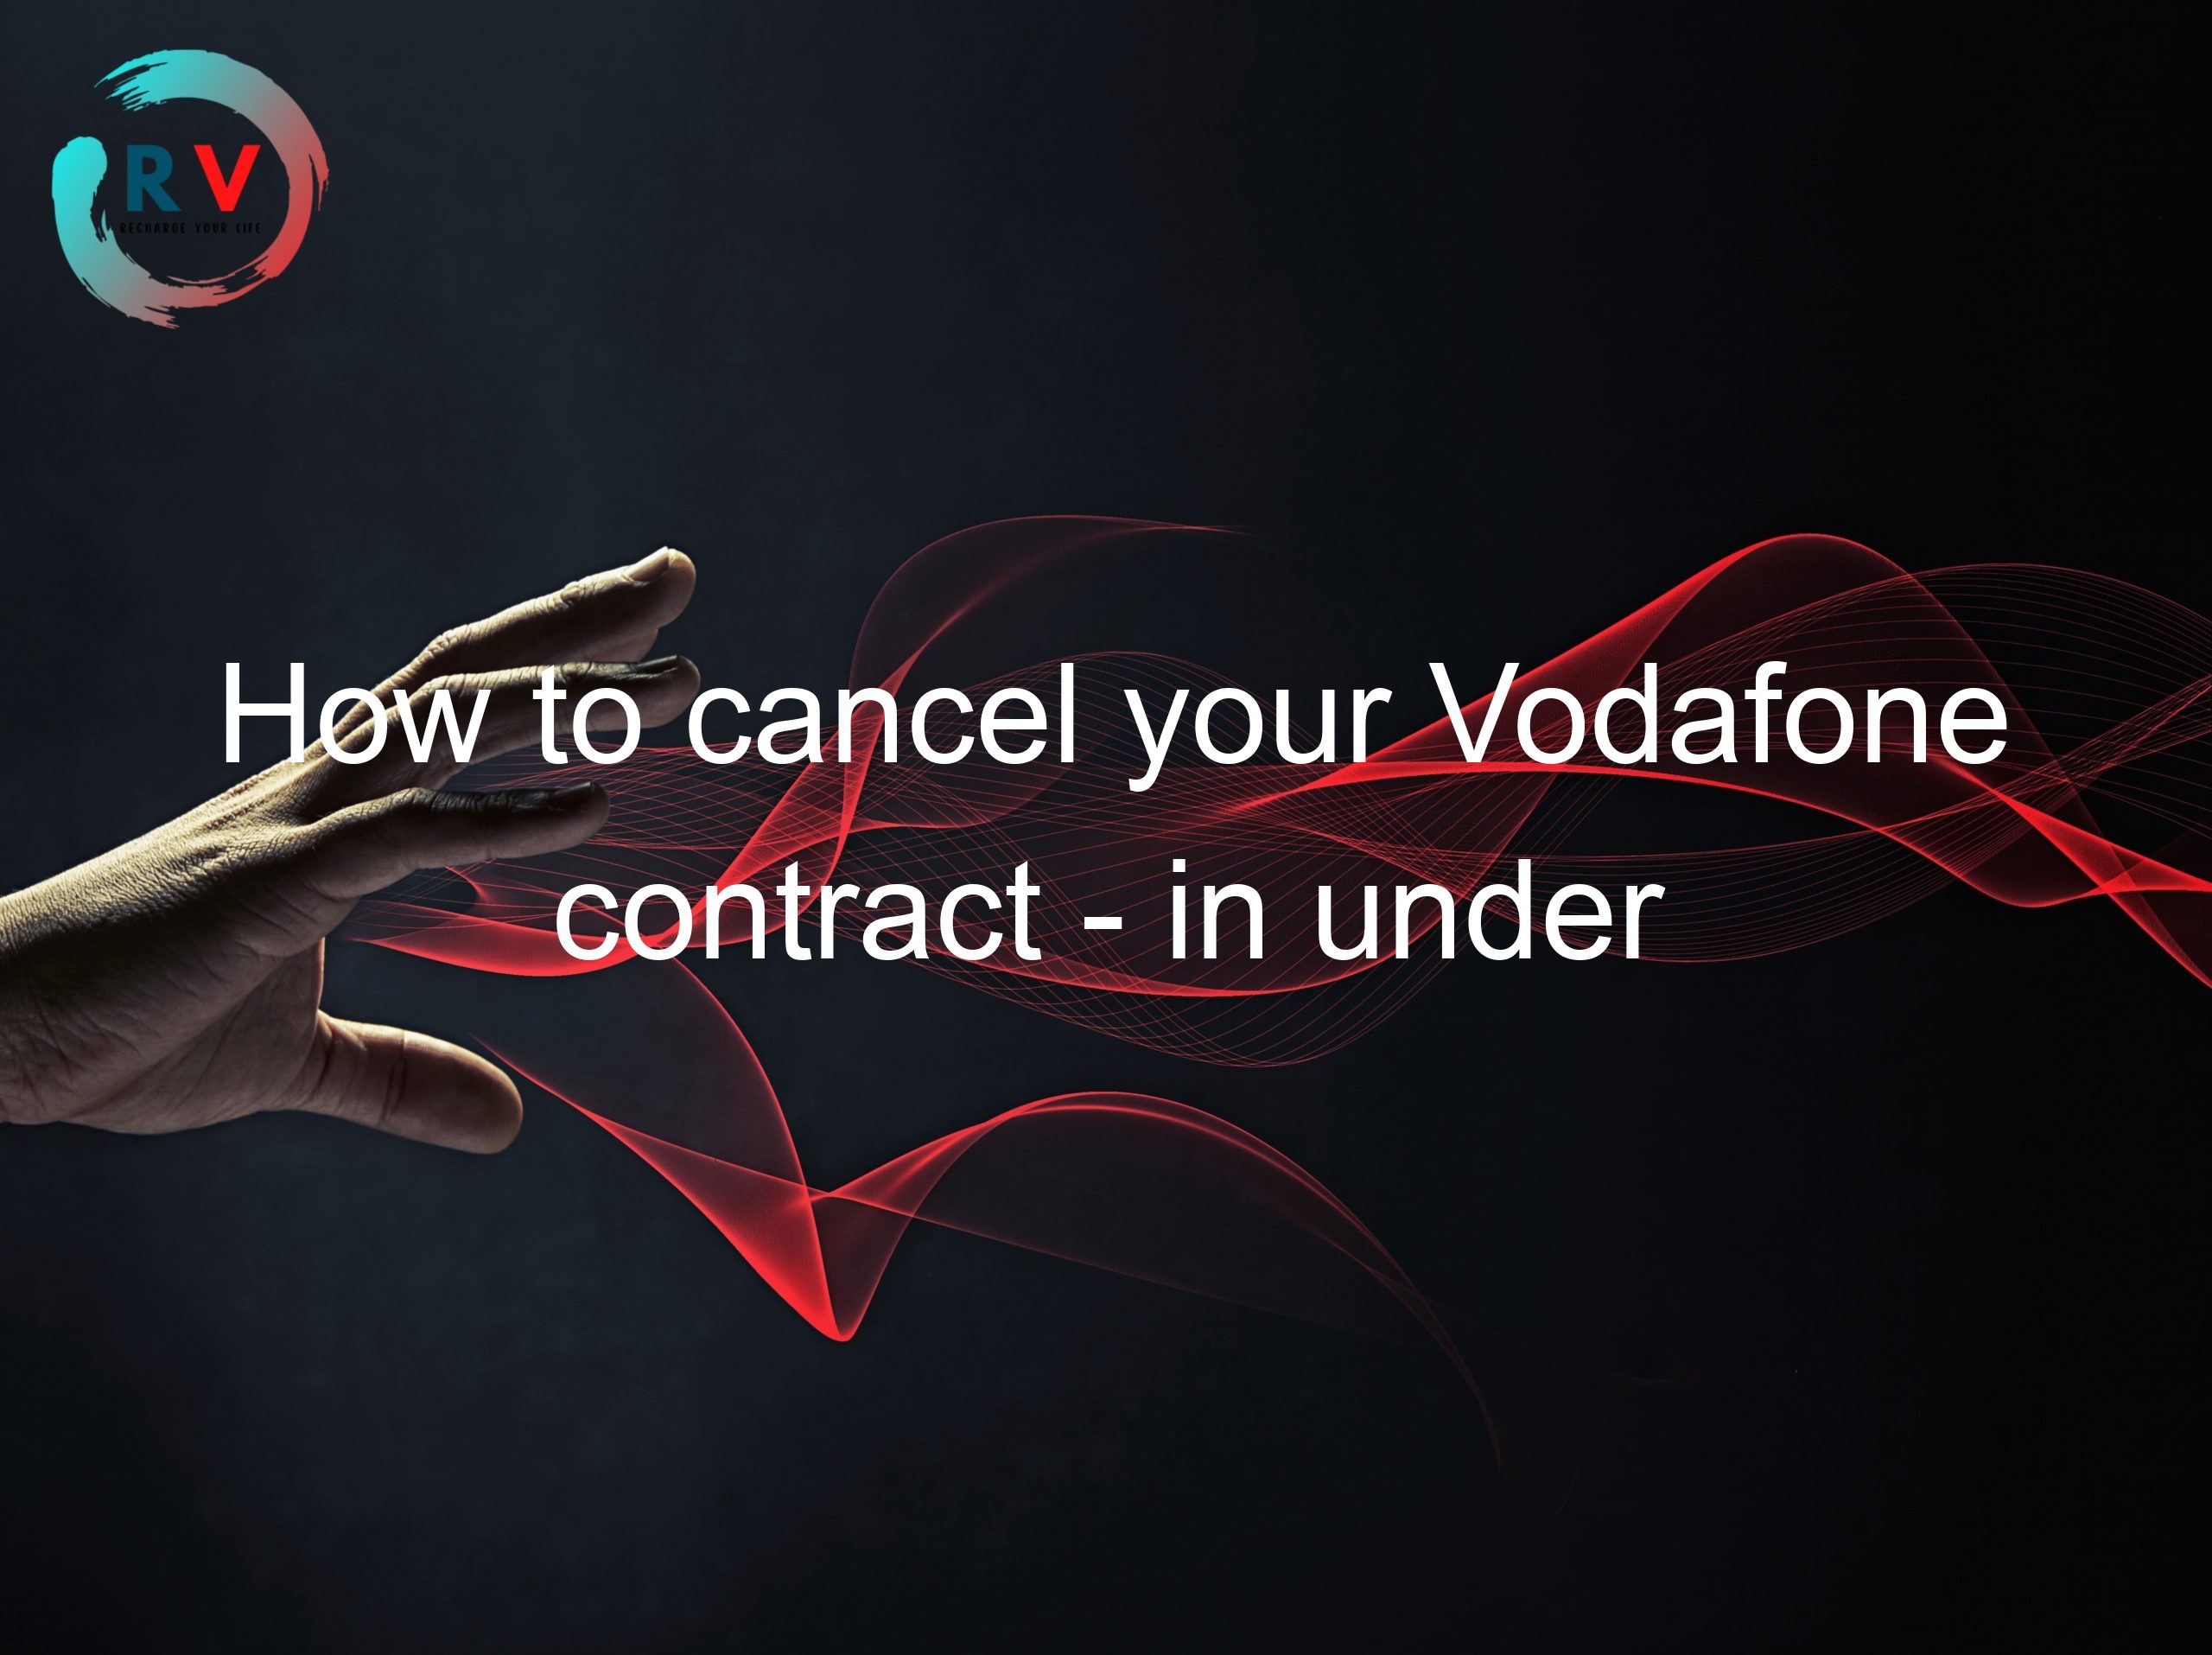 How to cancel your Vodafone contract - in under 60 seconds!